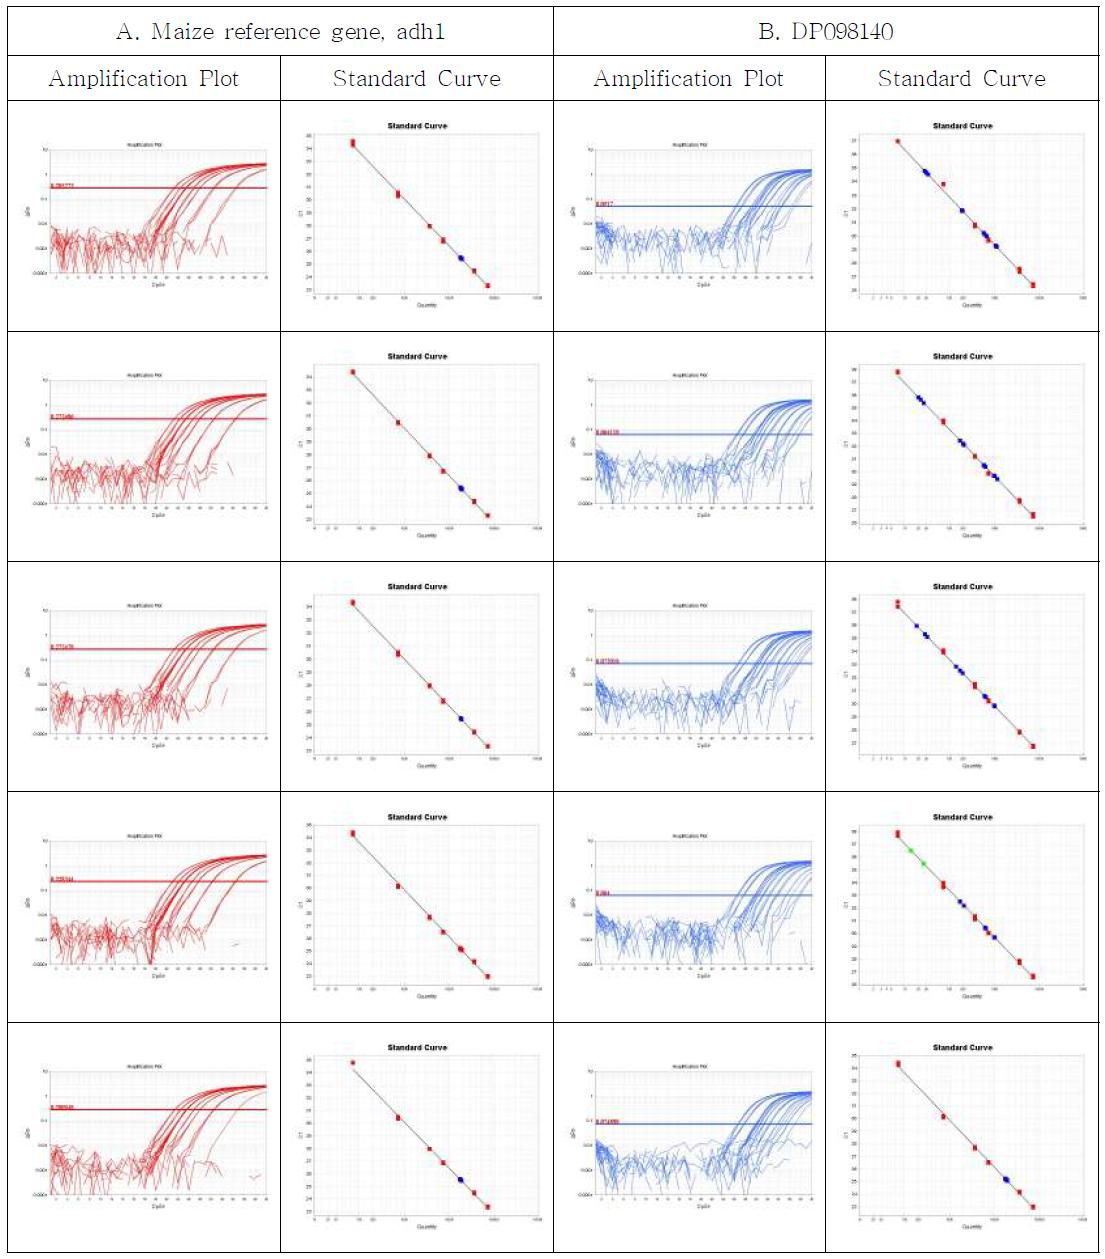 Amplification plots and standard curves for DP98140 event-specific quantitative Real-time PCR method using gradient-diluted DP98140 CRM genomic DNA as the template, performed by Lab. 2. A. Amplification graph and standard curves for the maize reference gene, adh1 assay. B. Amplification graph and standard curves for the DP98140-event specific assay.